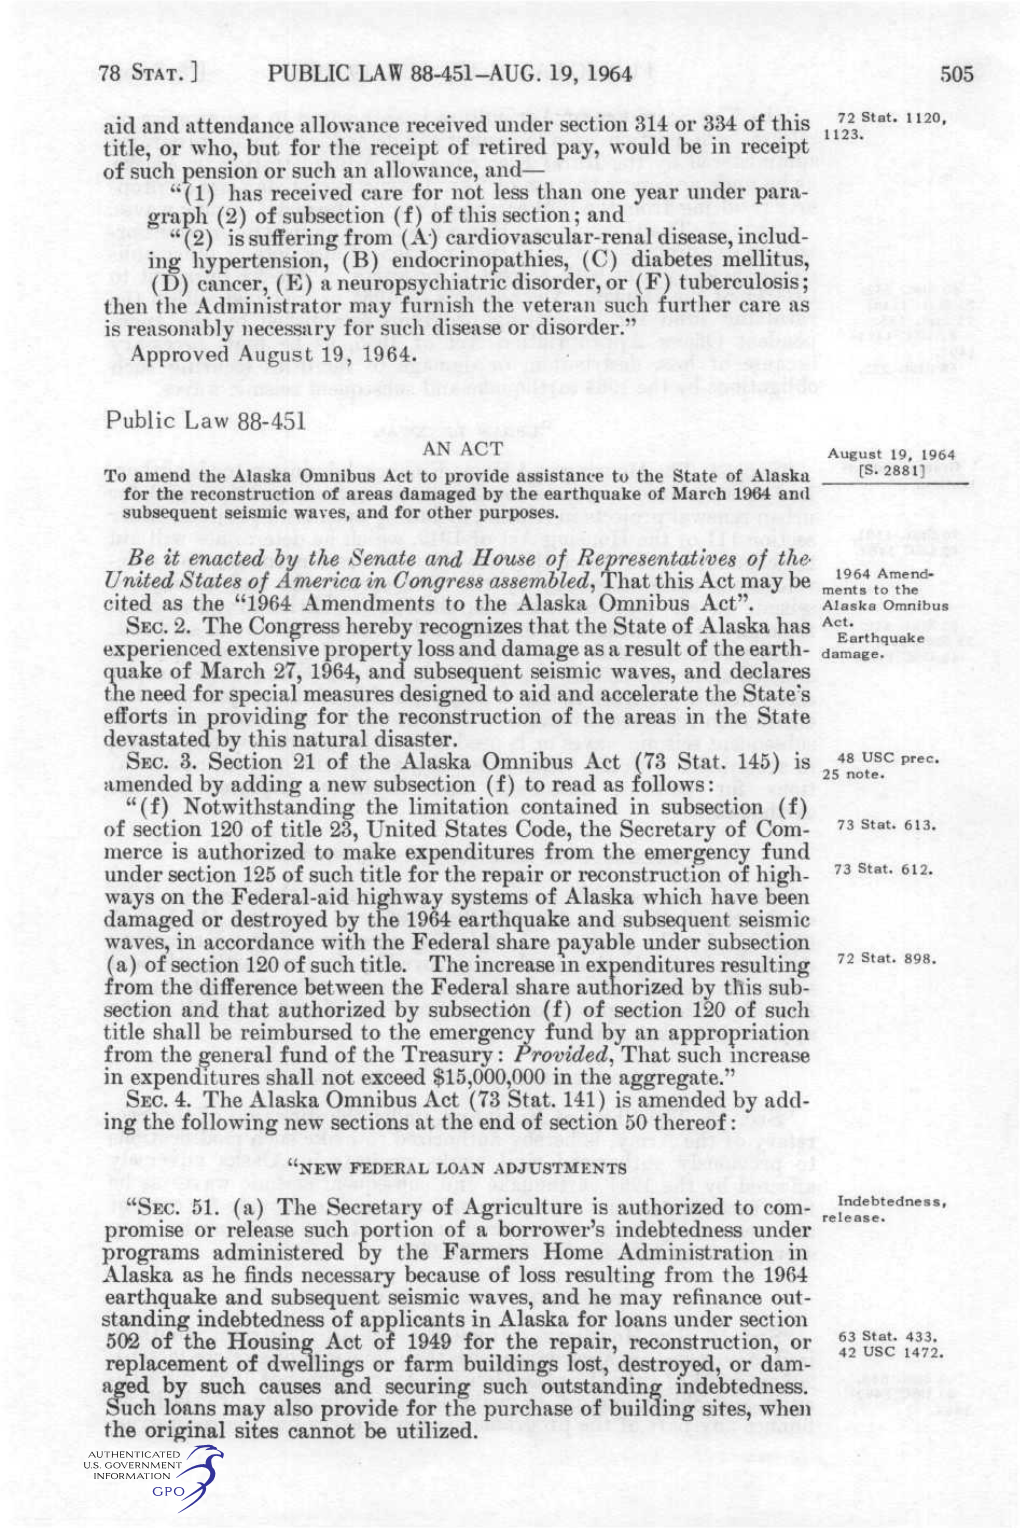 PUBLIC LAW 88-451-AUG. 19, 1964 505 Aid and Attendance Allowance Received Under Section 314 Or 334 of This Title, Or Who, but Fo